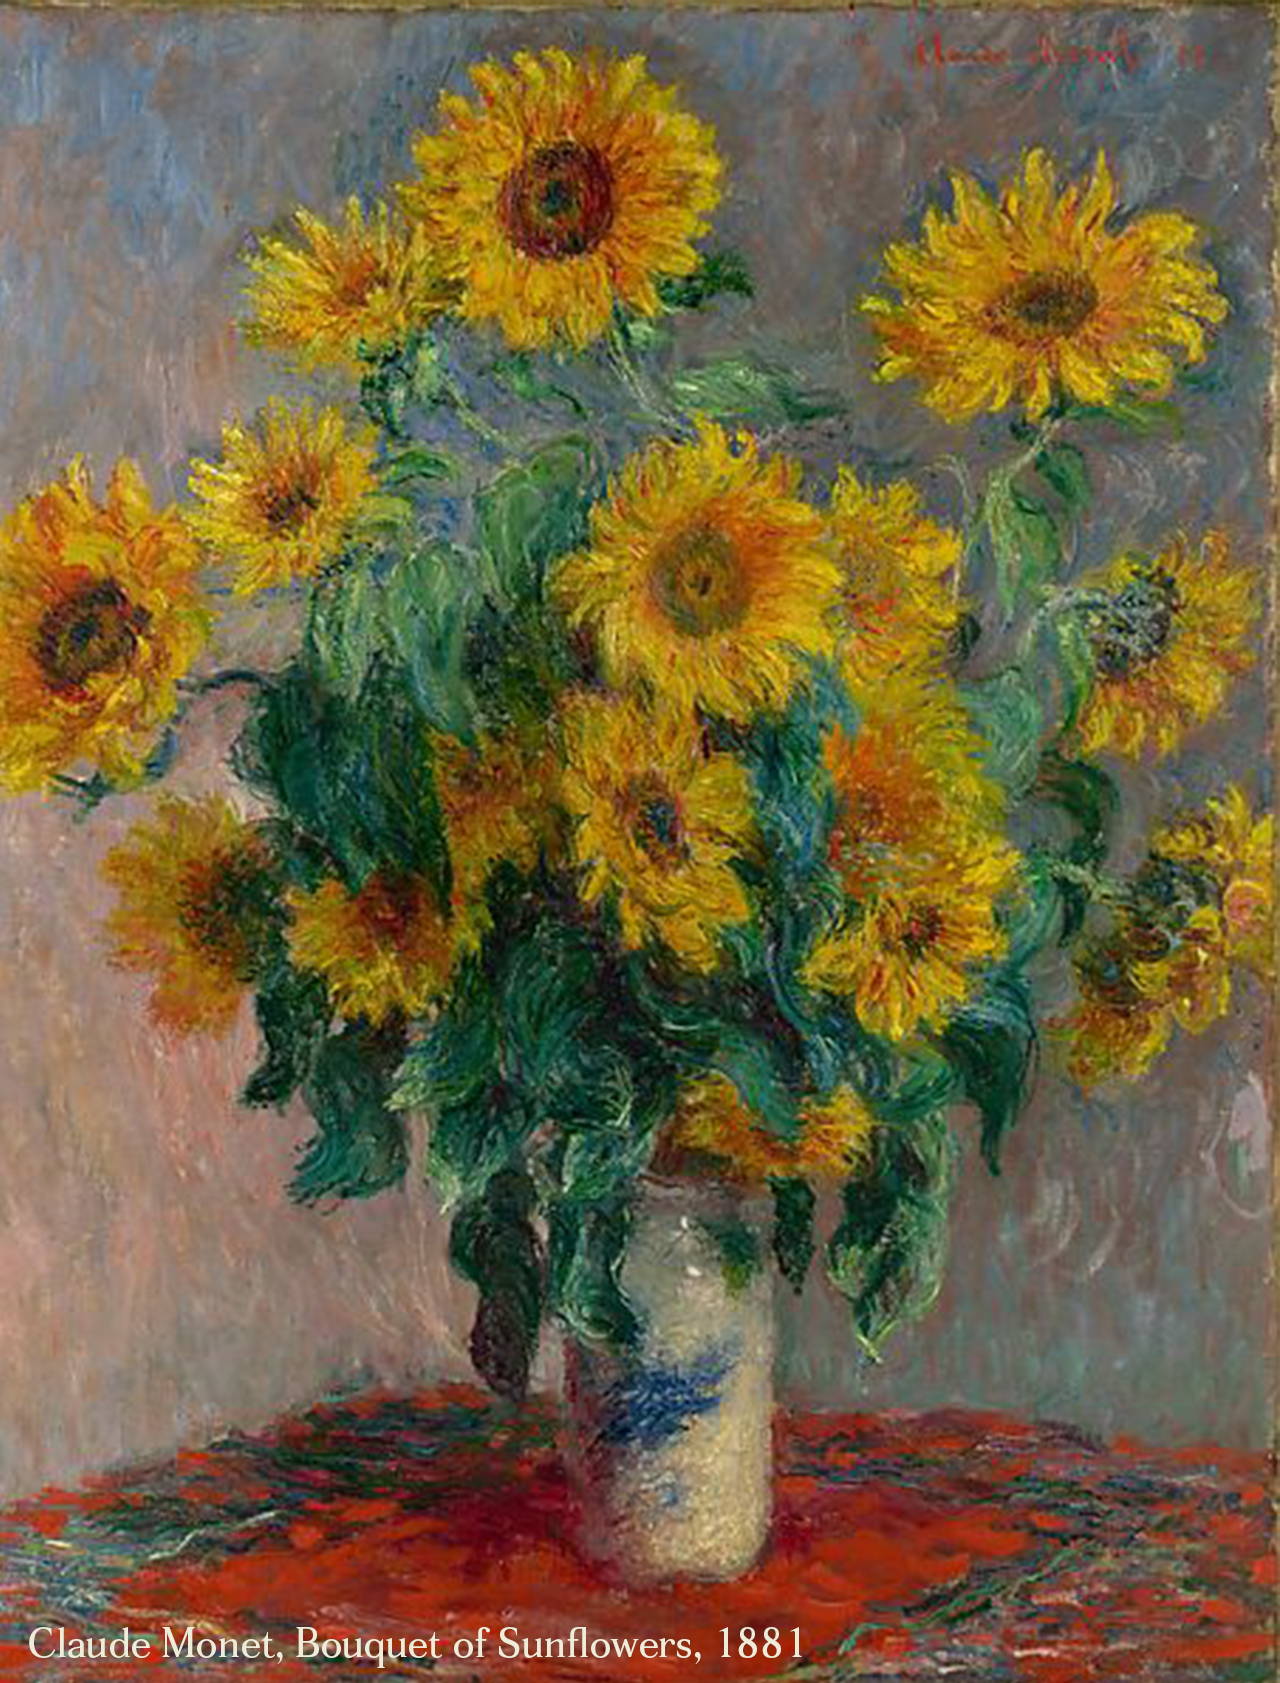 Wild at Heart - Sunflower painting by Claude Monet